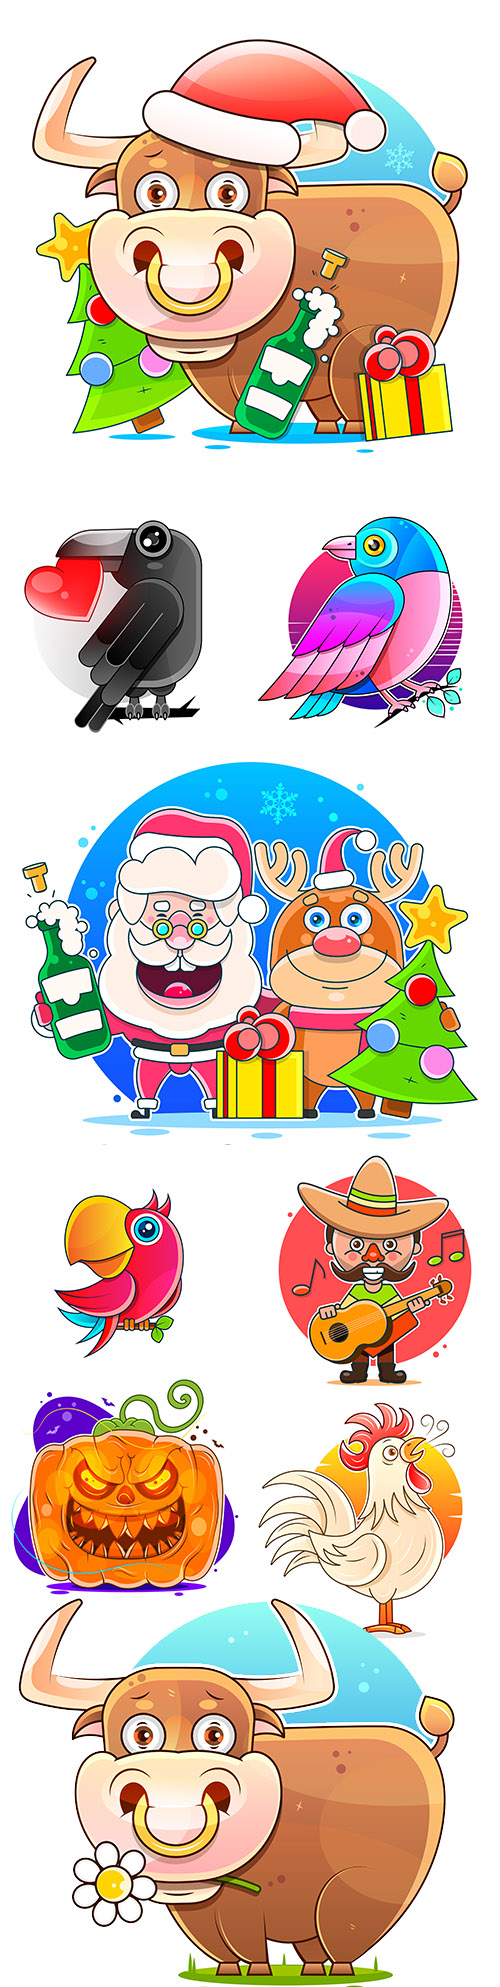 Symbol of year bull and collection of different cartoon characters illustration
